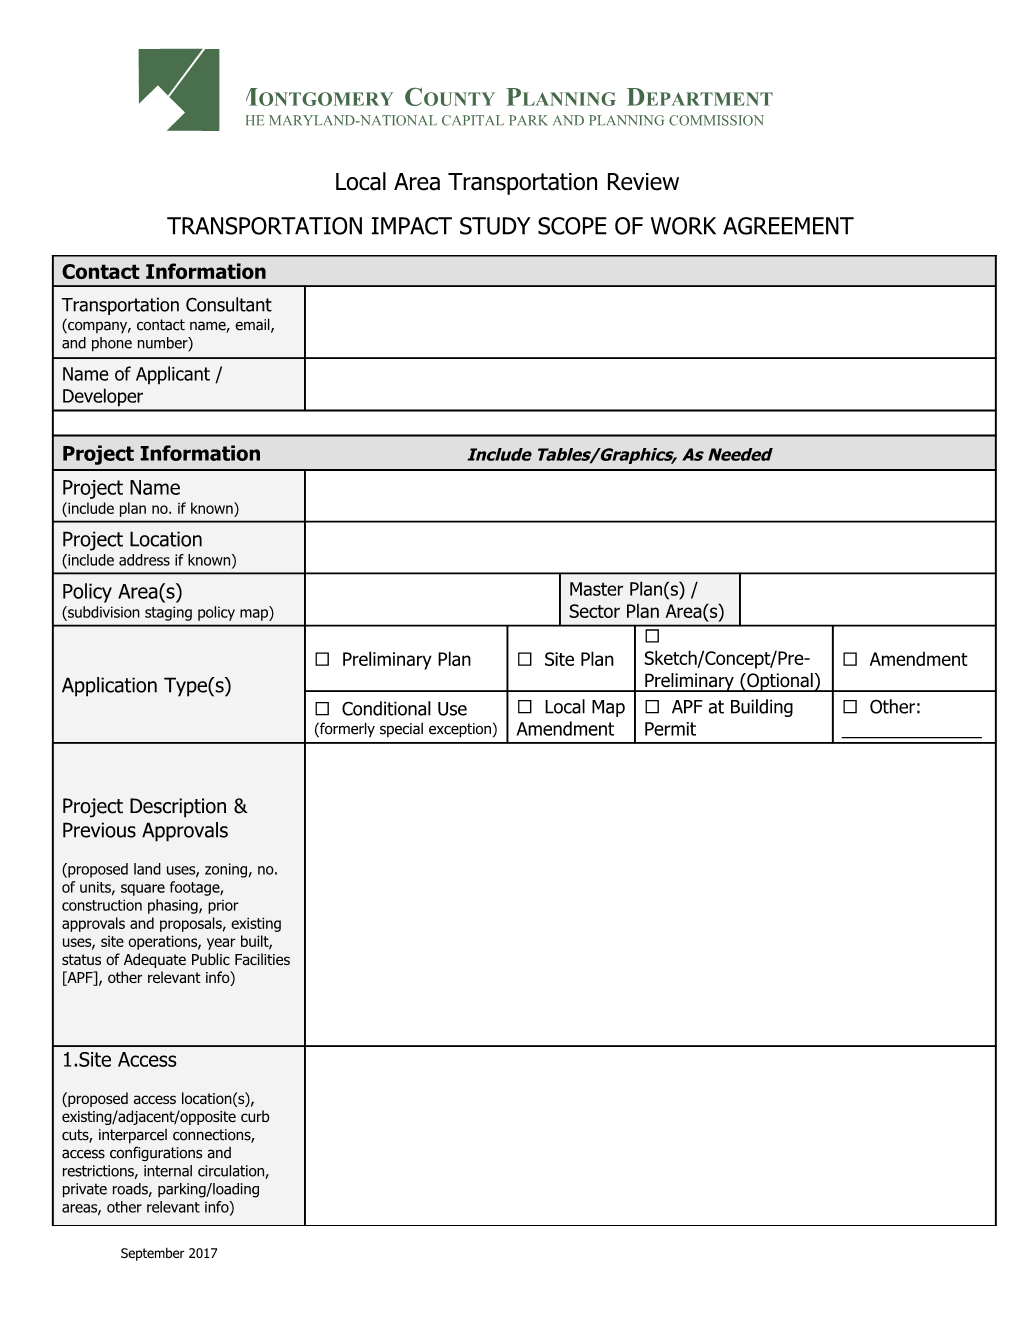 Local Area Transportation Review